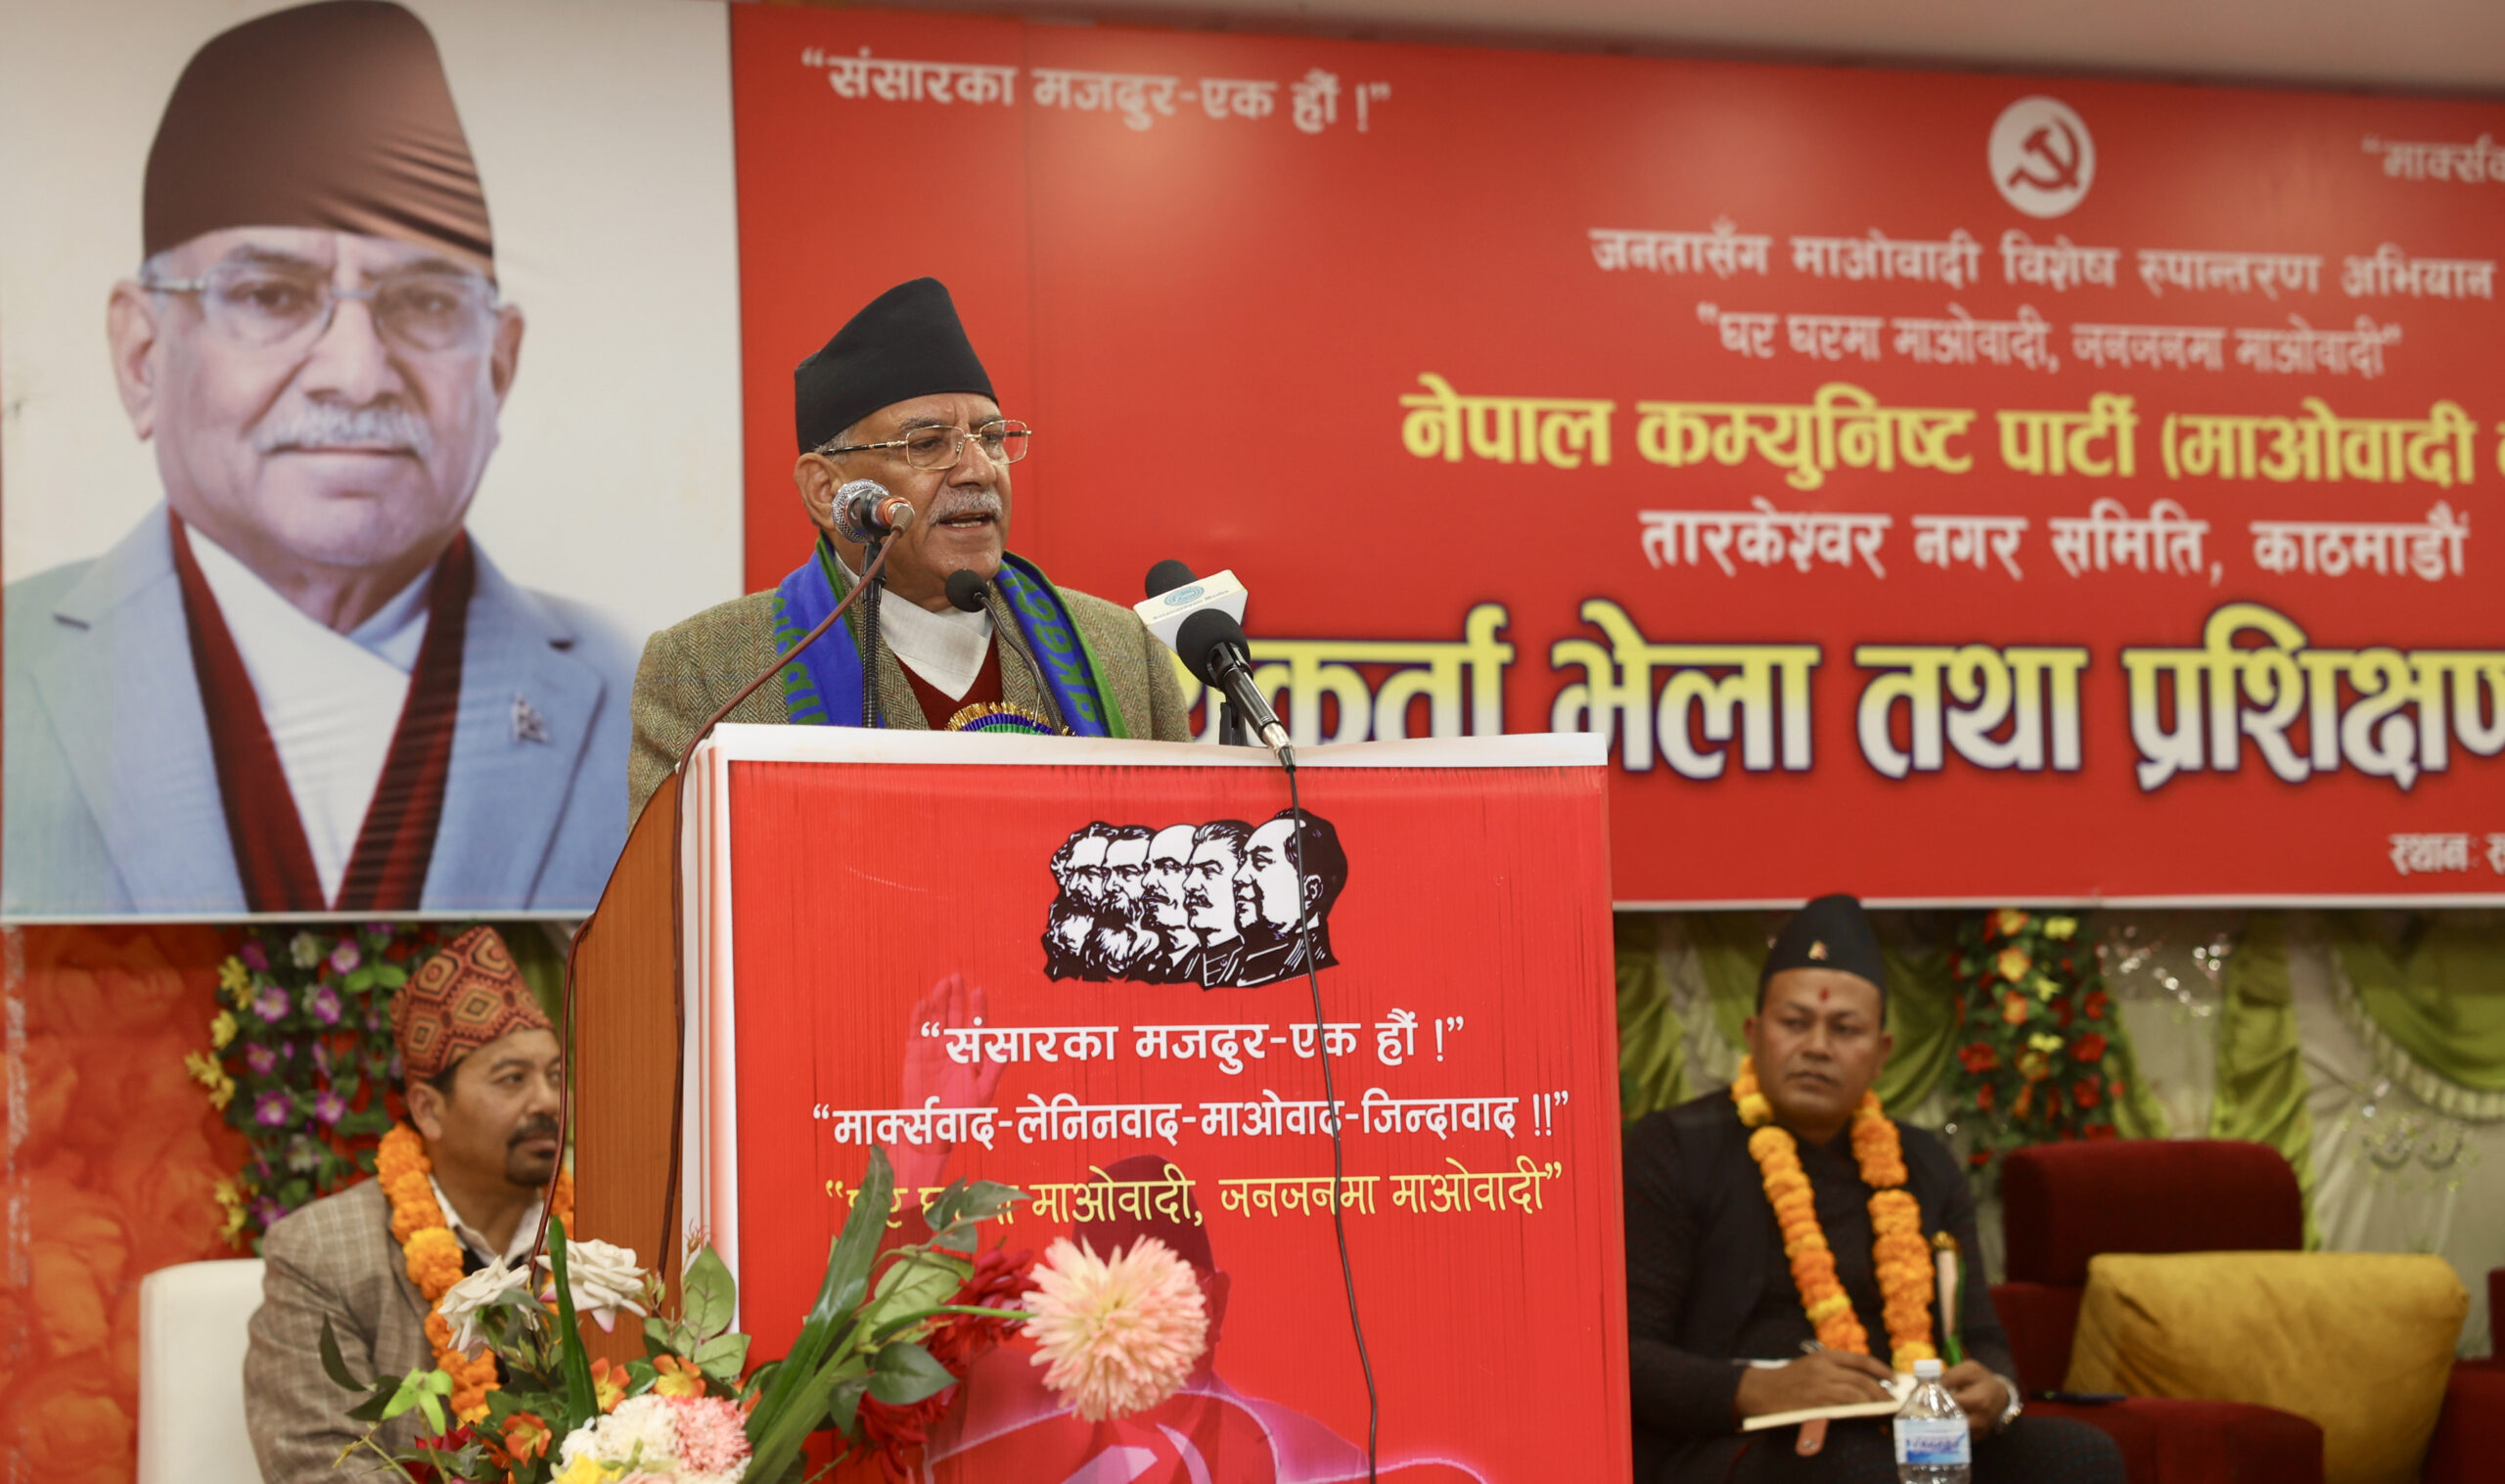 We are preparing to set out for another battle against corruption, says PM Dahal